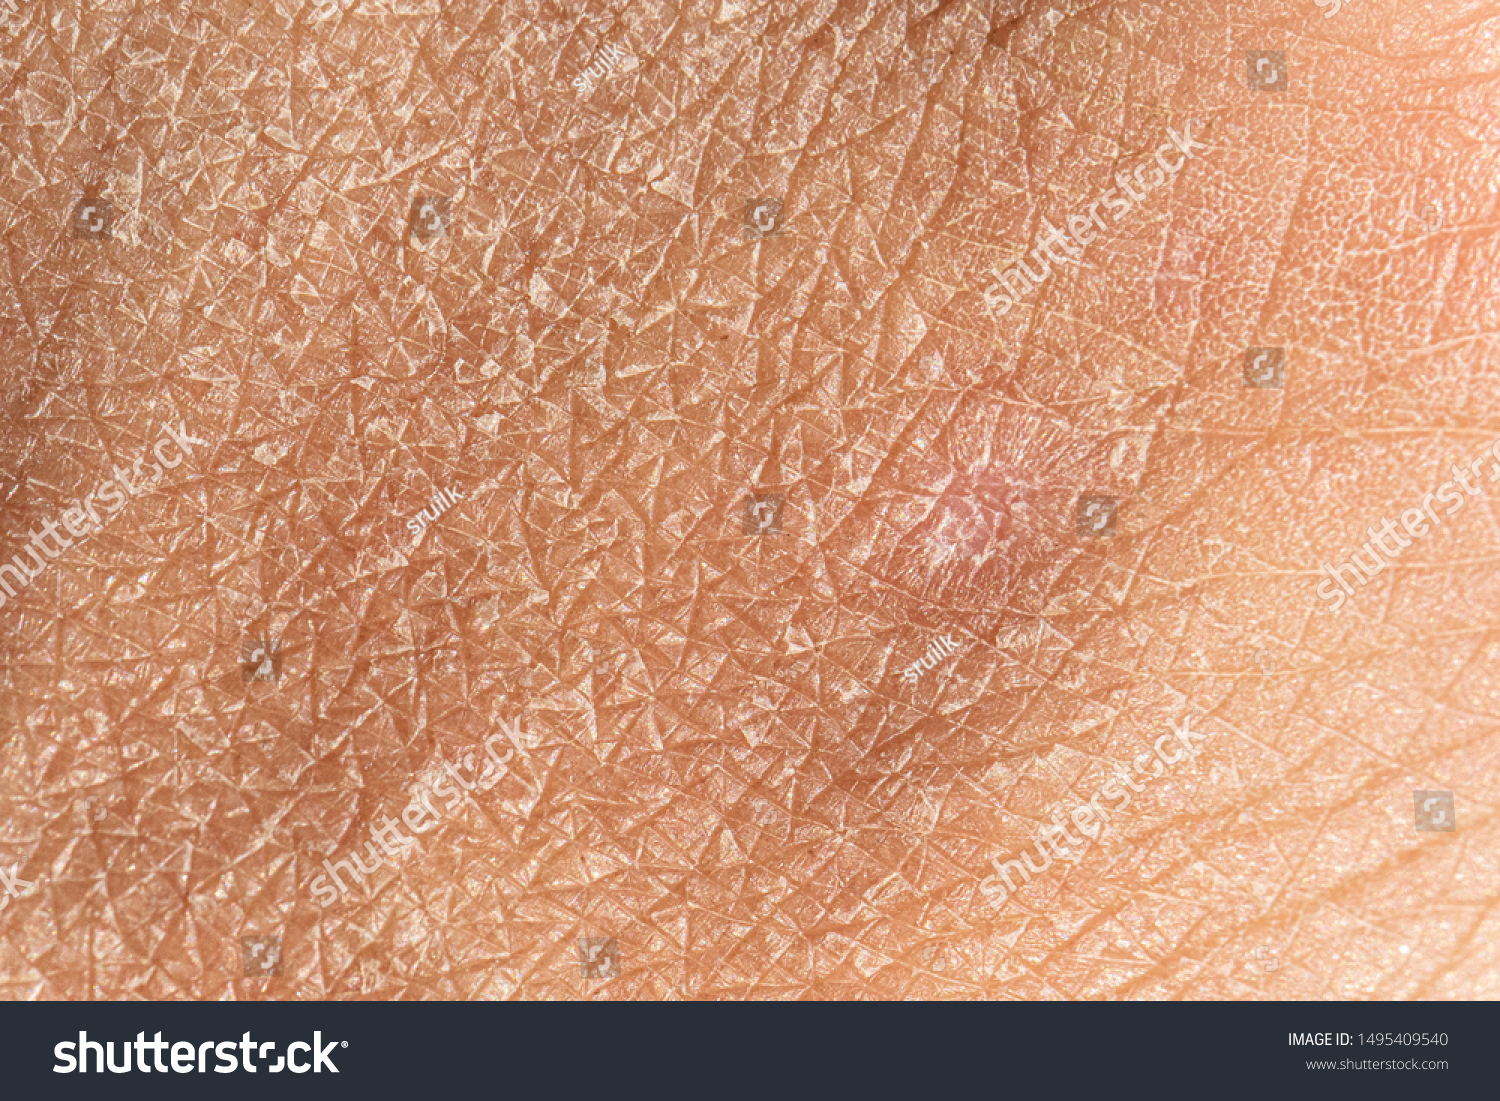 Dermatology and skincare concept with a macro view on the flaking skin of a caucasian person. Detailed view of the cracks and lines filling the frame. #1495409540